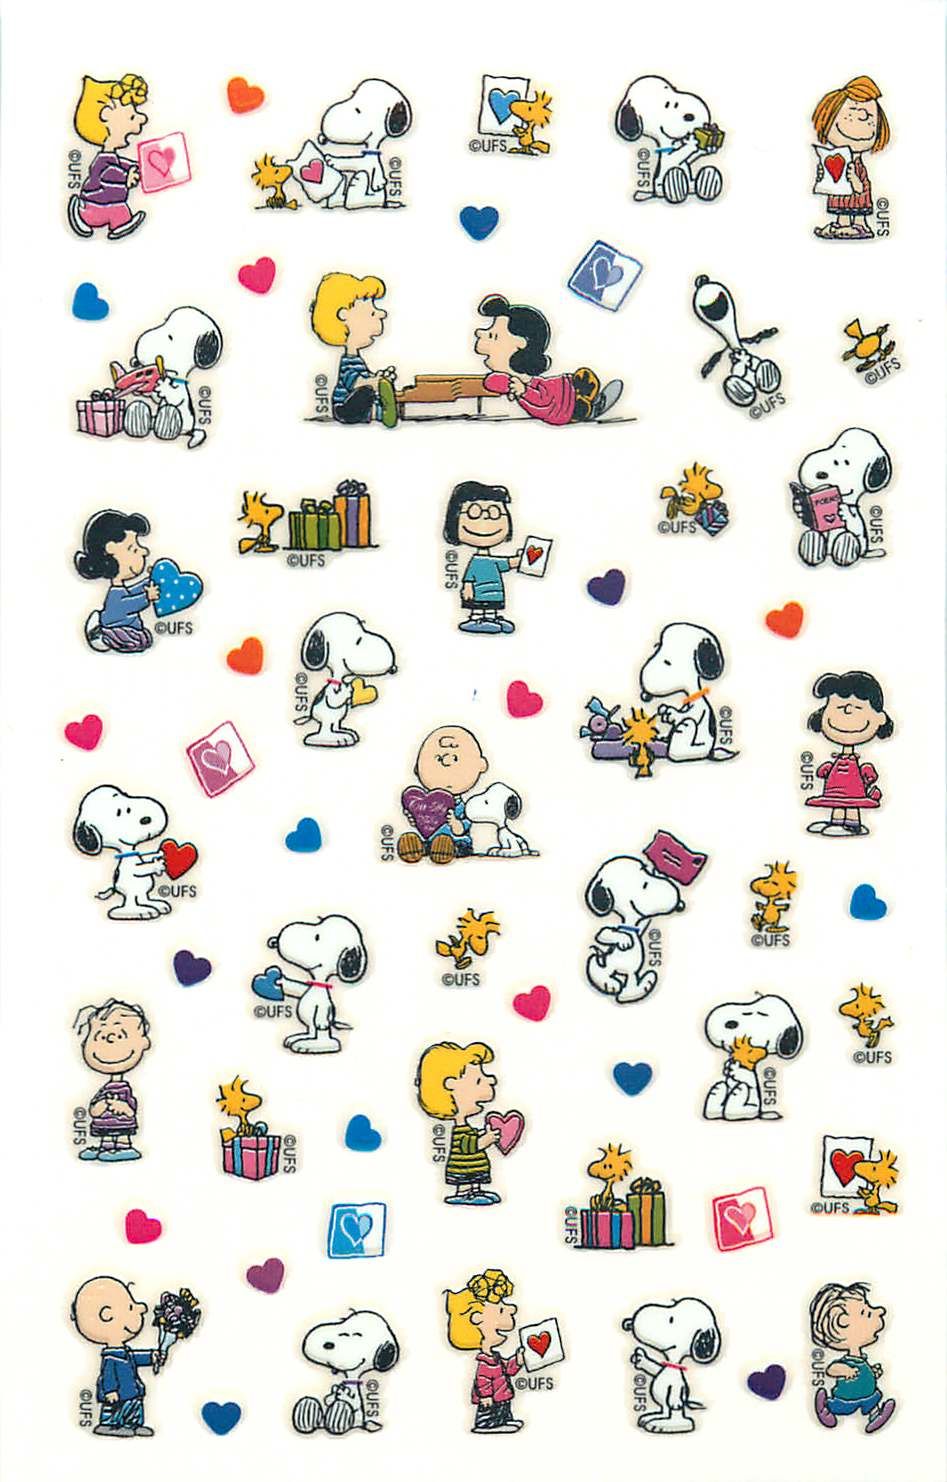 Snoopy Valentine Wallpapers